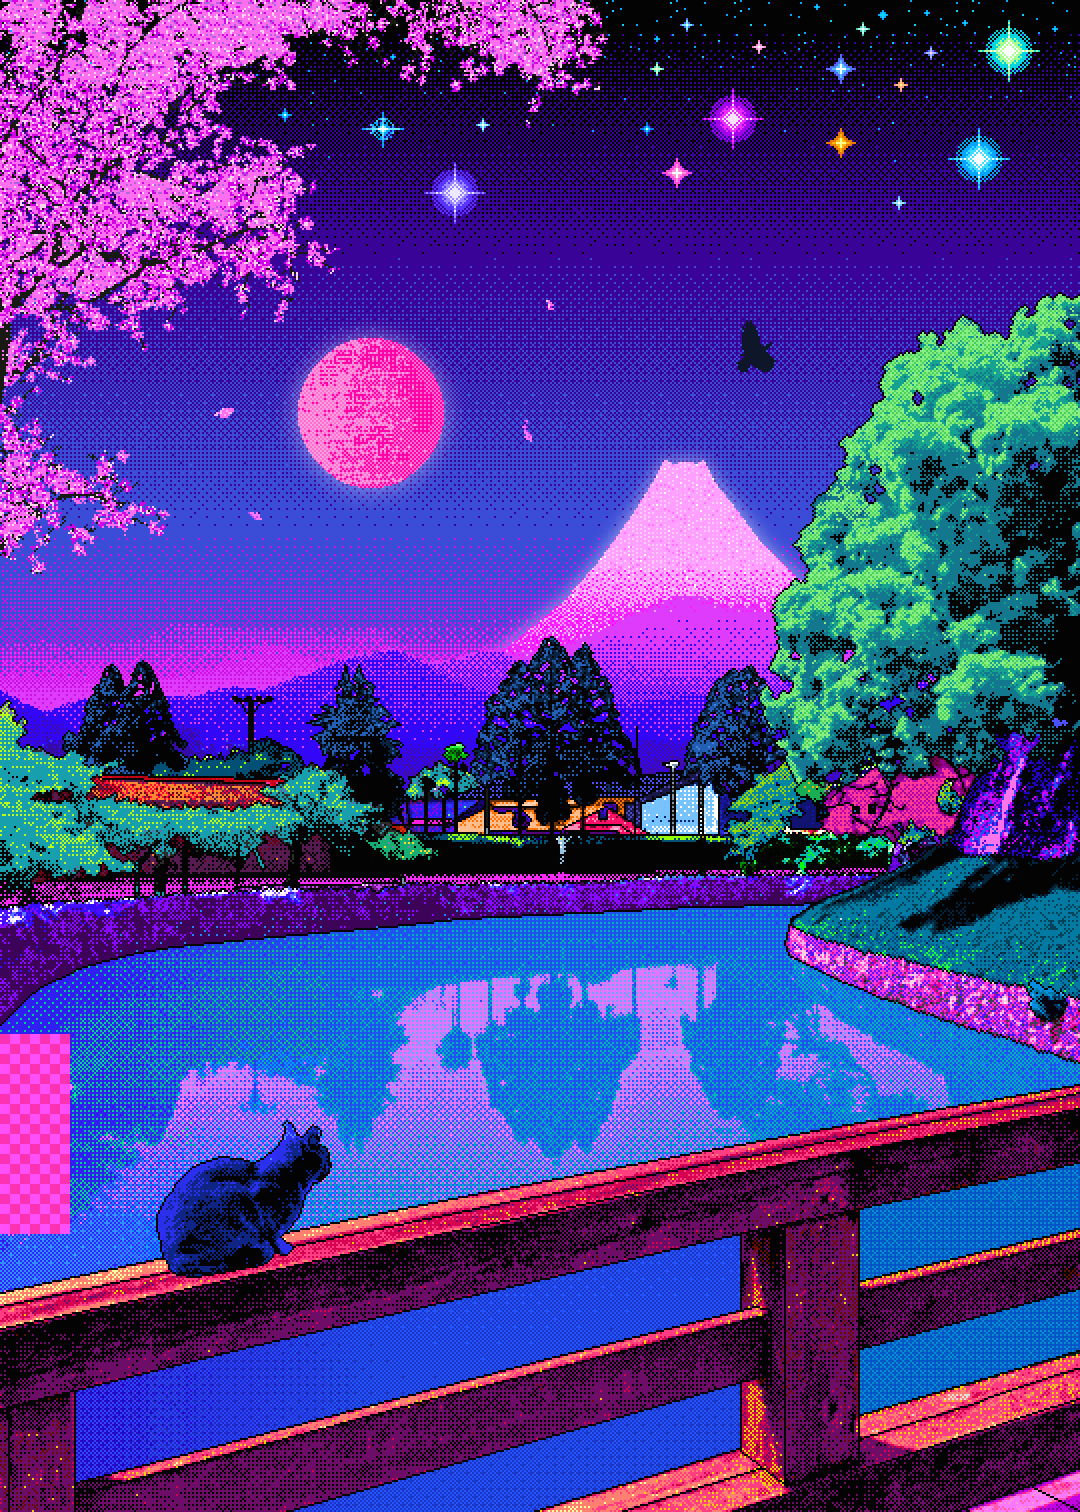 A digital illustration of a Japanese garden at night with a full moon and stars. - Pixel art, art